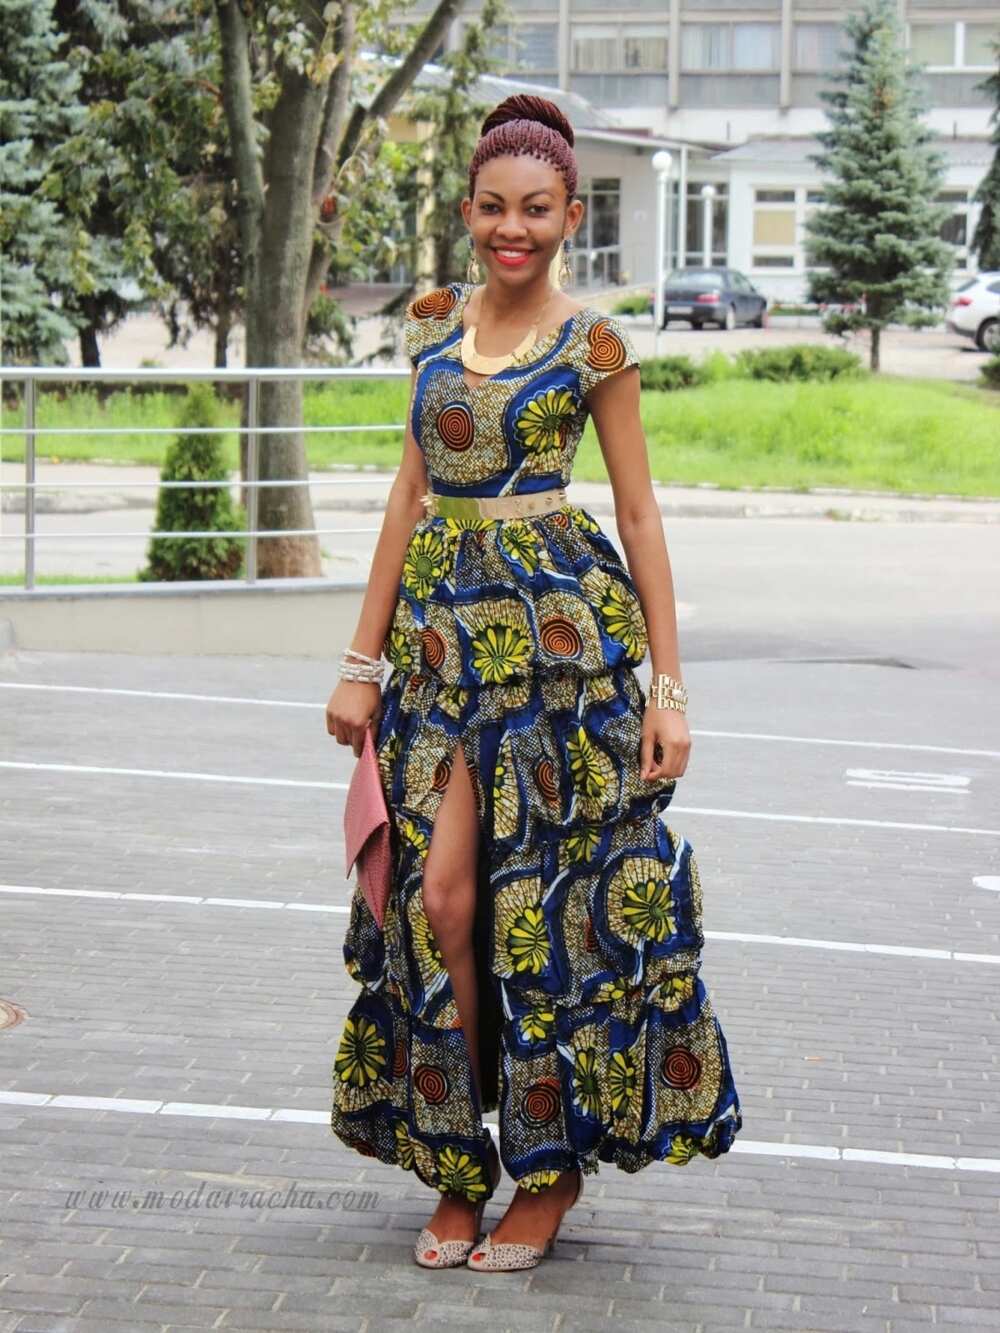 Latest styles for native gowns in Nigeria